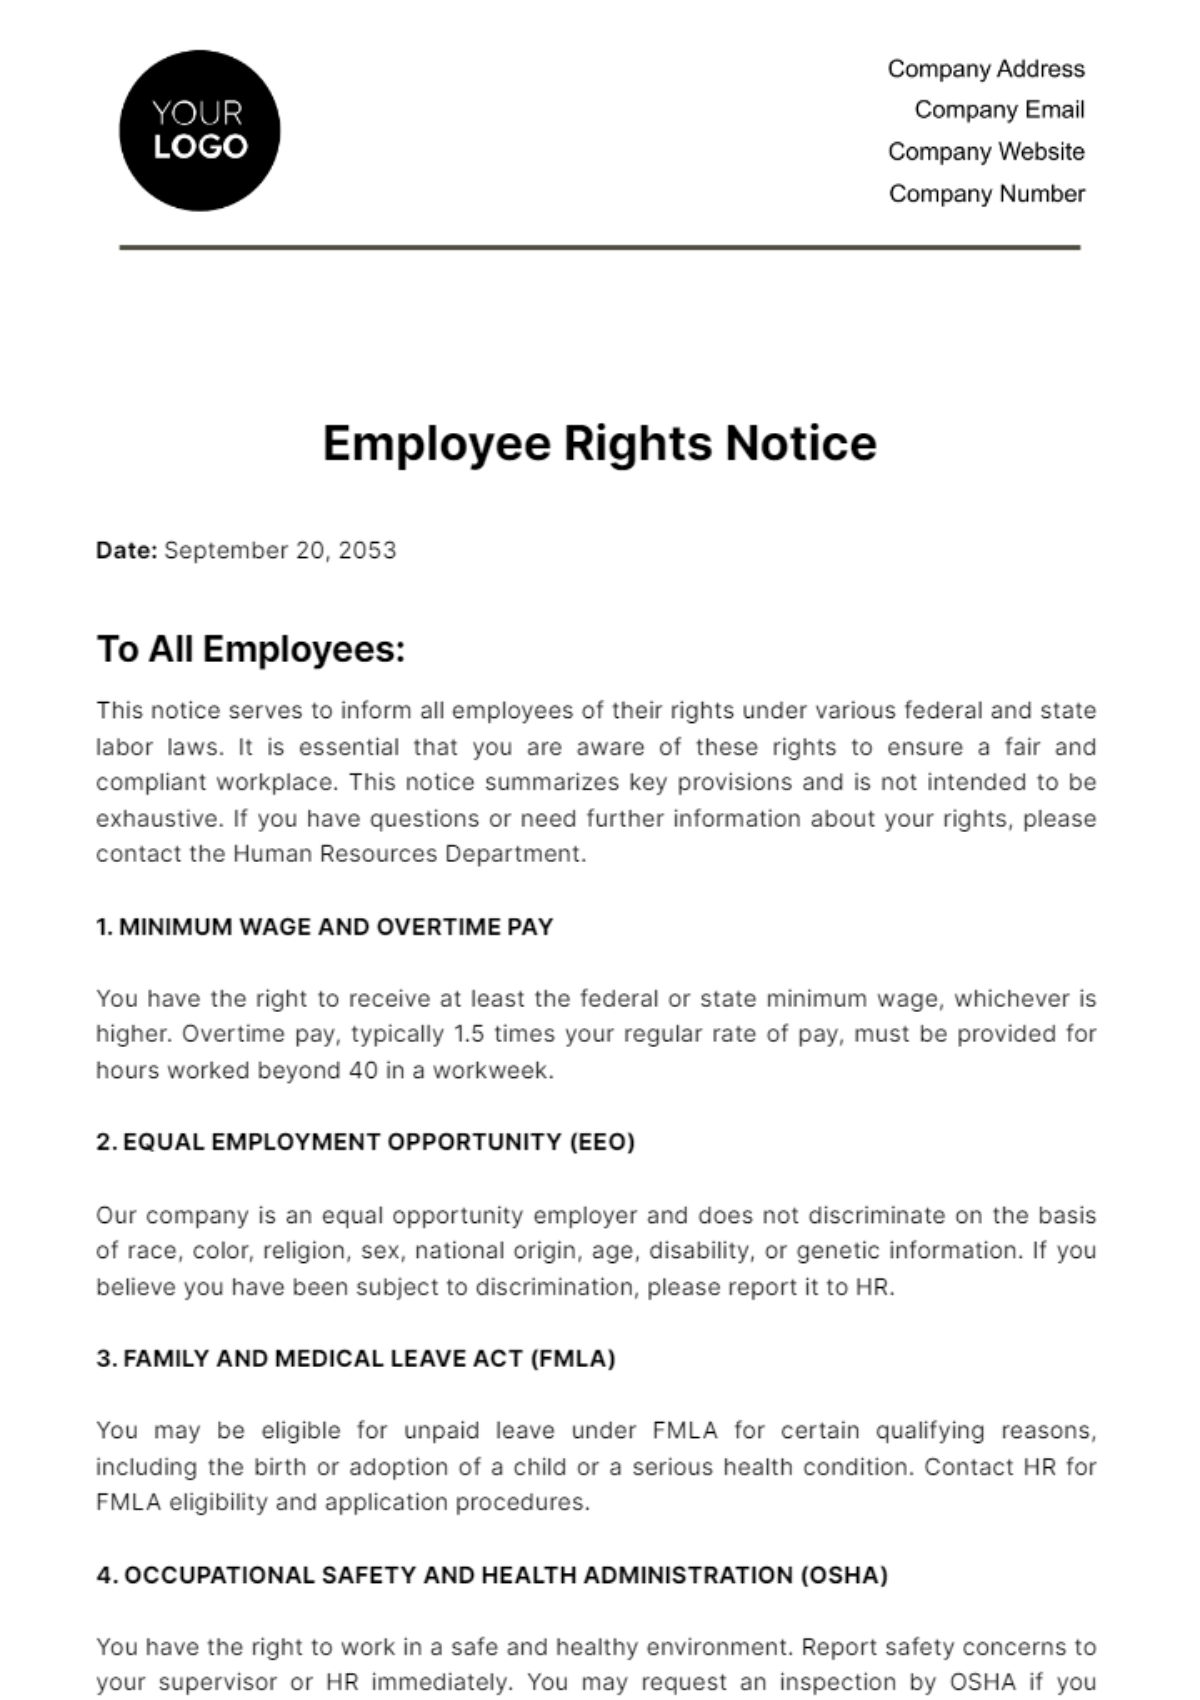 Employee Rights Notice HR Template